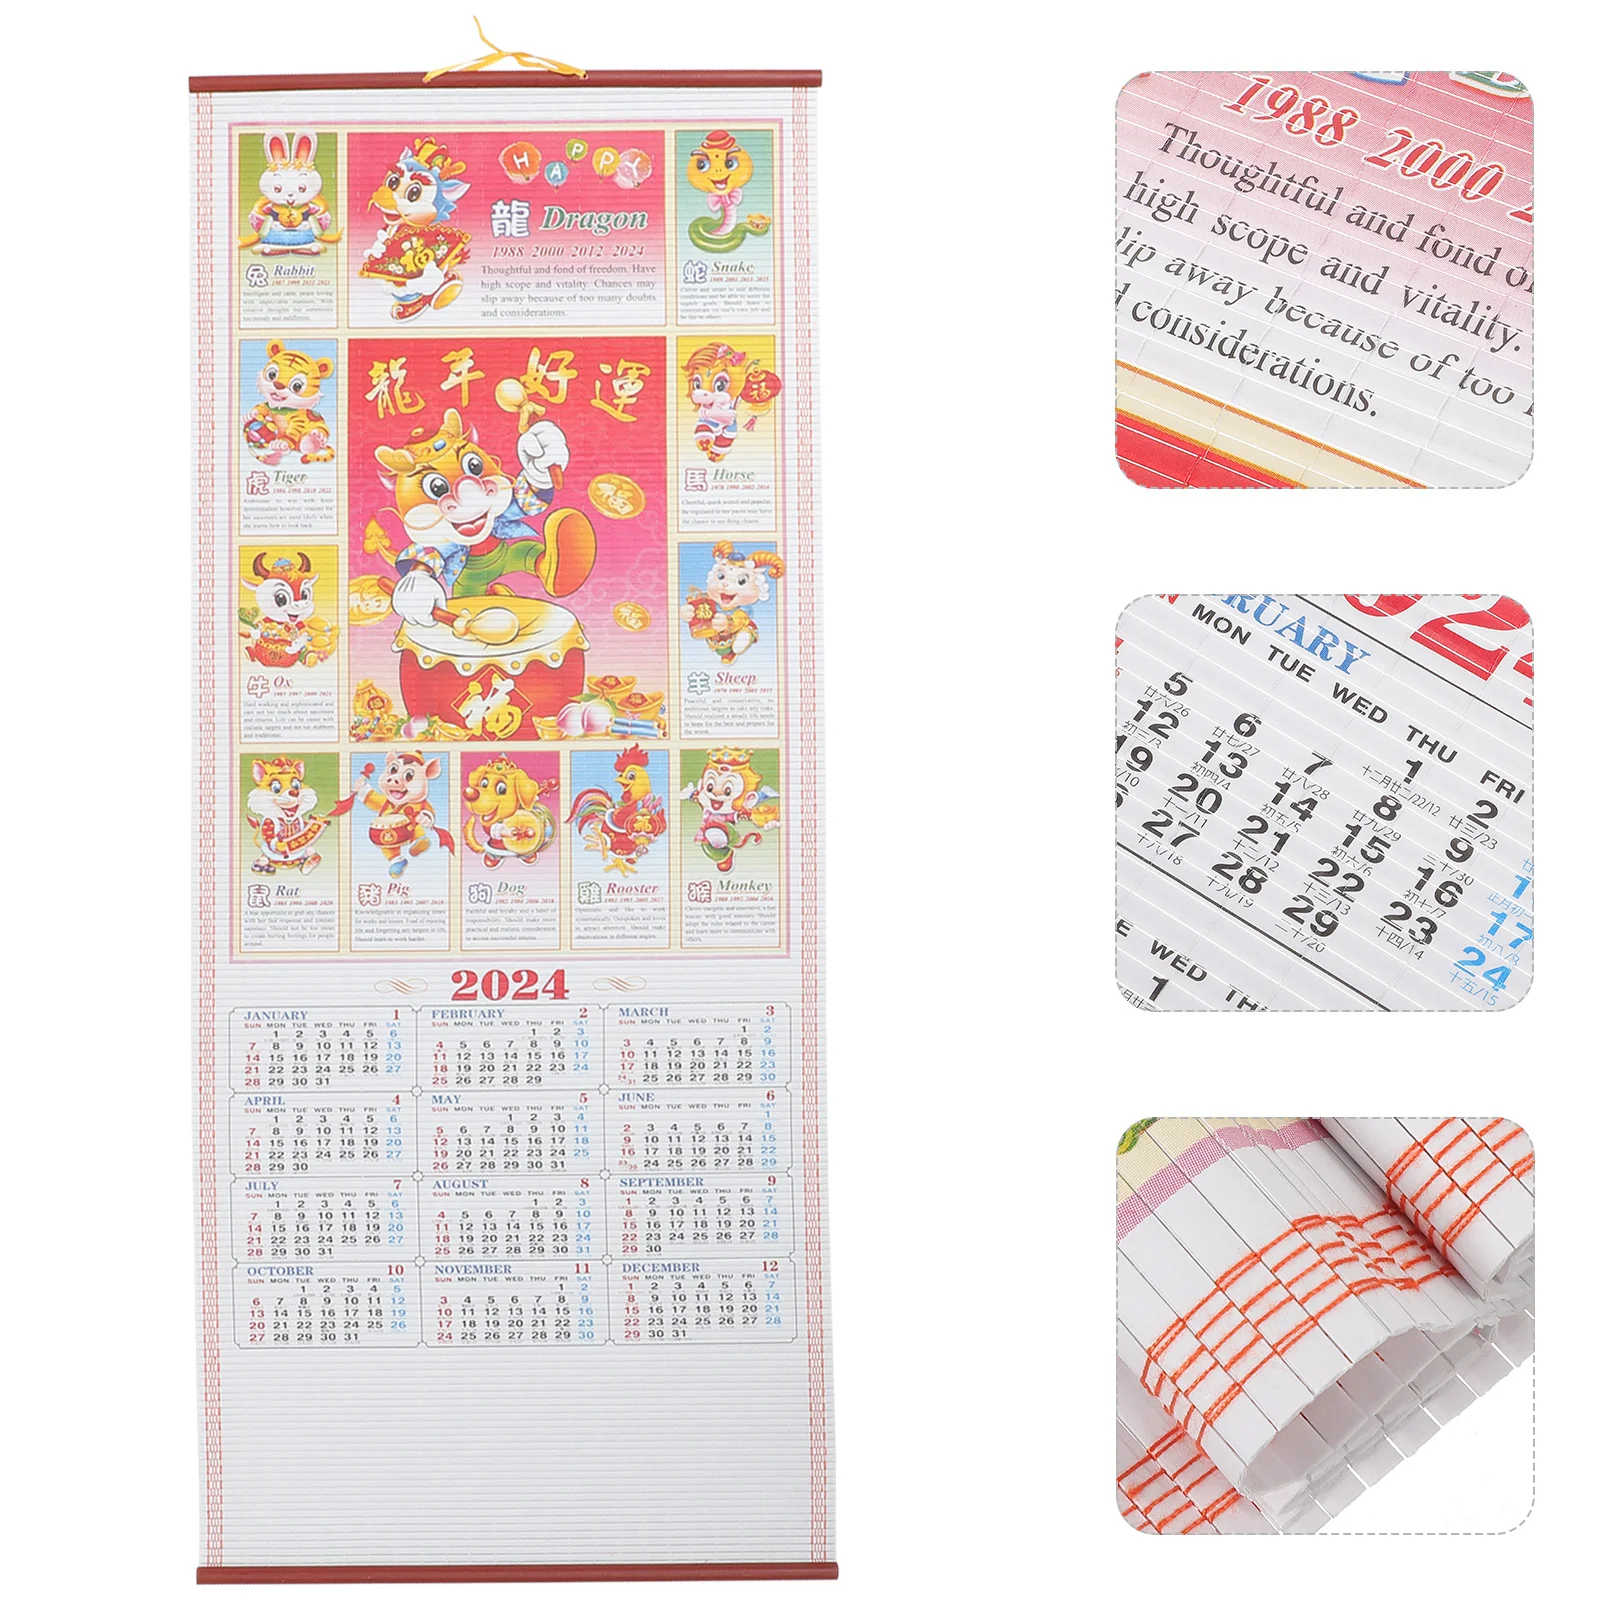 

2024 Zodiac Wall Calendar Chinese Planning Monthly Exquisite Decor Office Clear Printed Lunar Decorative Hanging Delicate